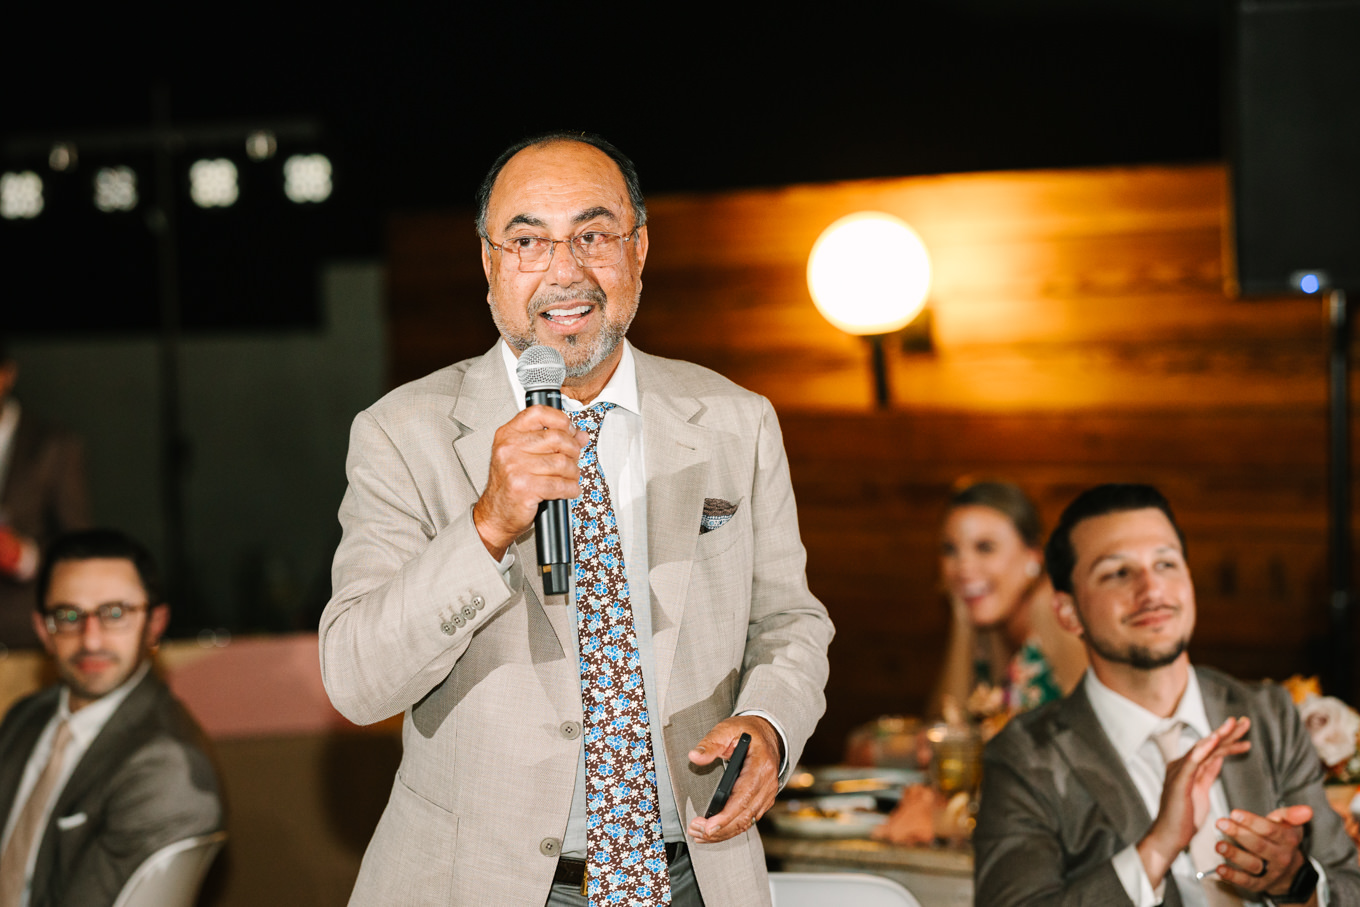 Speeches at wedding reception | Pink and orange Lautner Compound wedding | Colorful Palm Springs wedding photography | #palmspringsphotographer #palmspringswedding #lautnercompound #southerncaliforniawedding  Source: Mary Costa Photography | Los Angeles